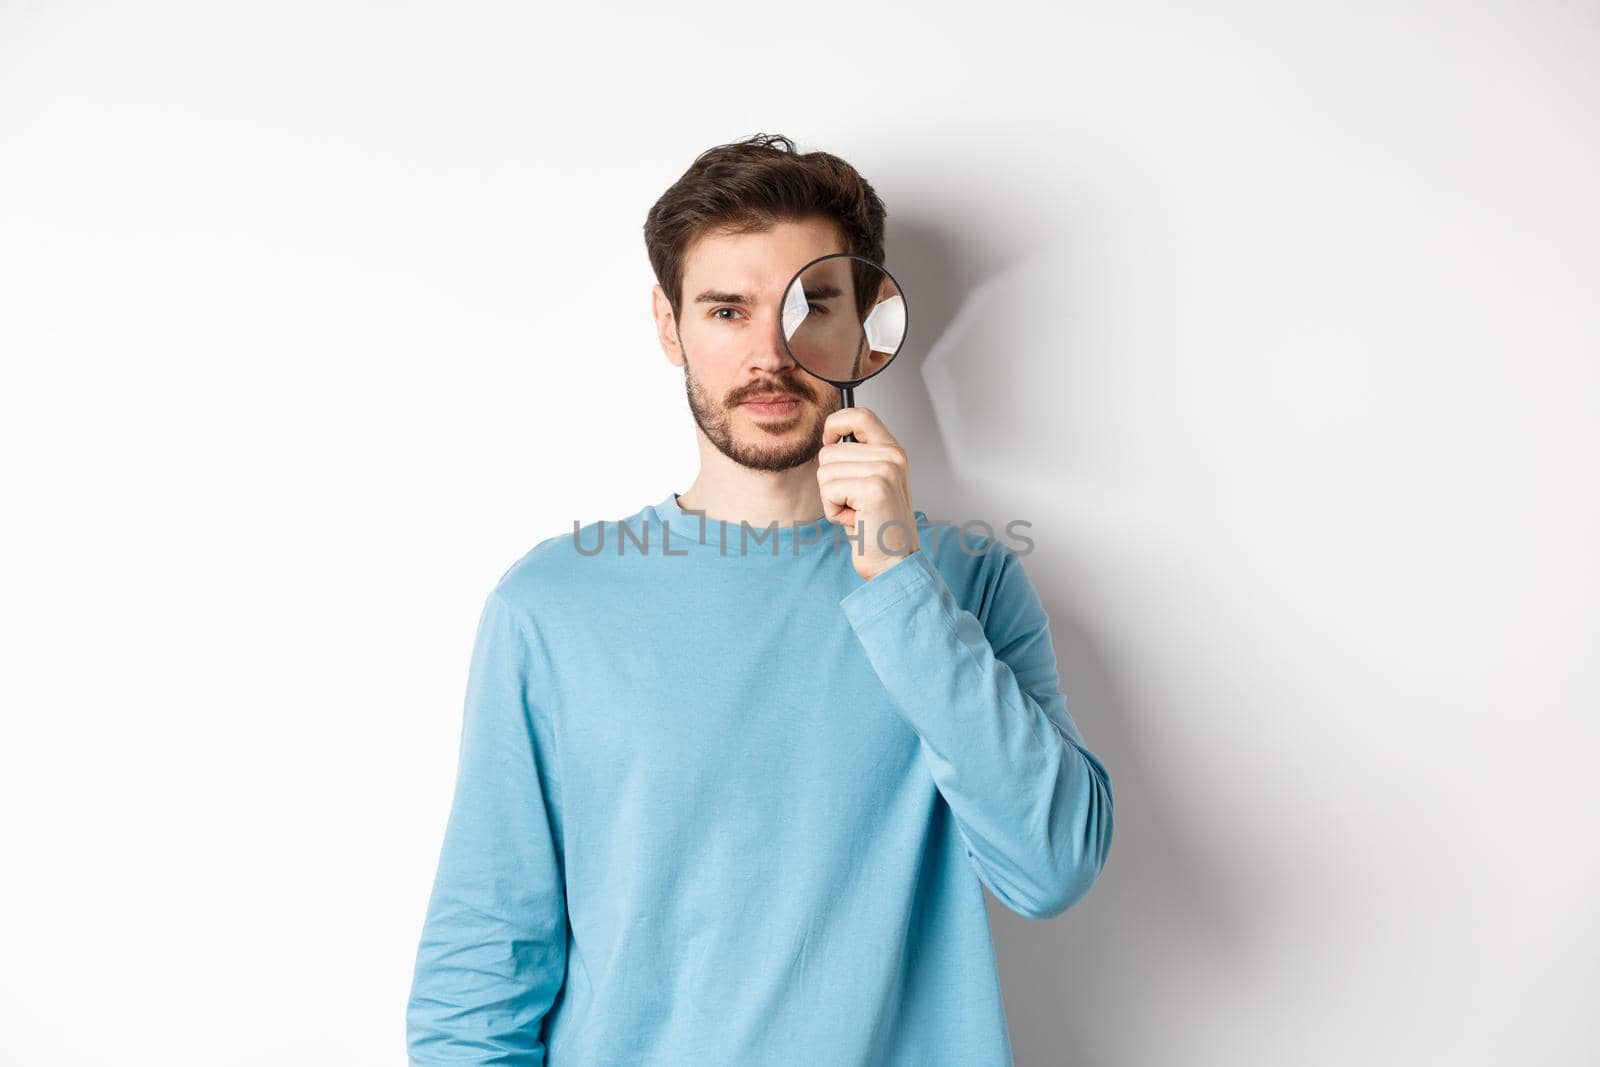 Man searching for something, looking through magnifying glass at camera, standing on white background.